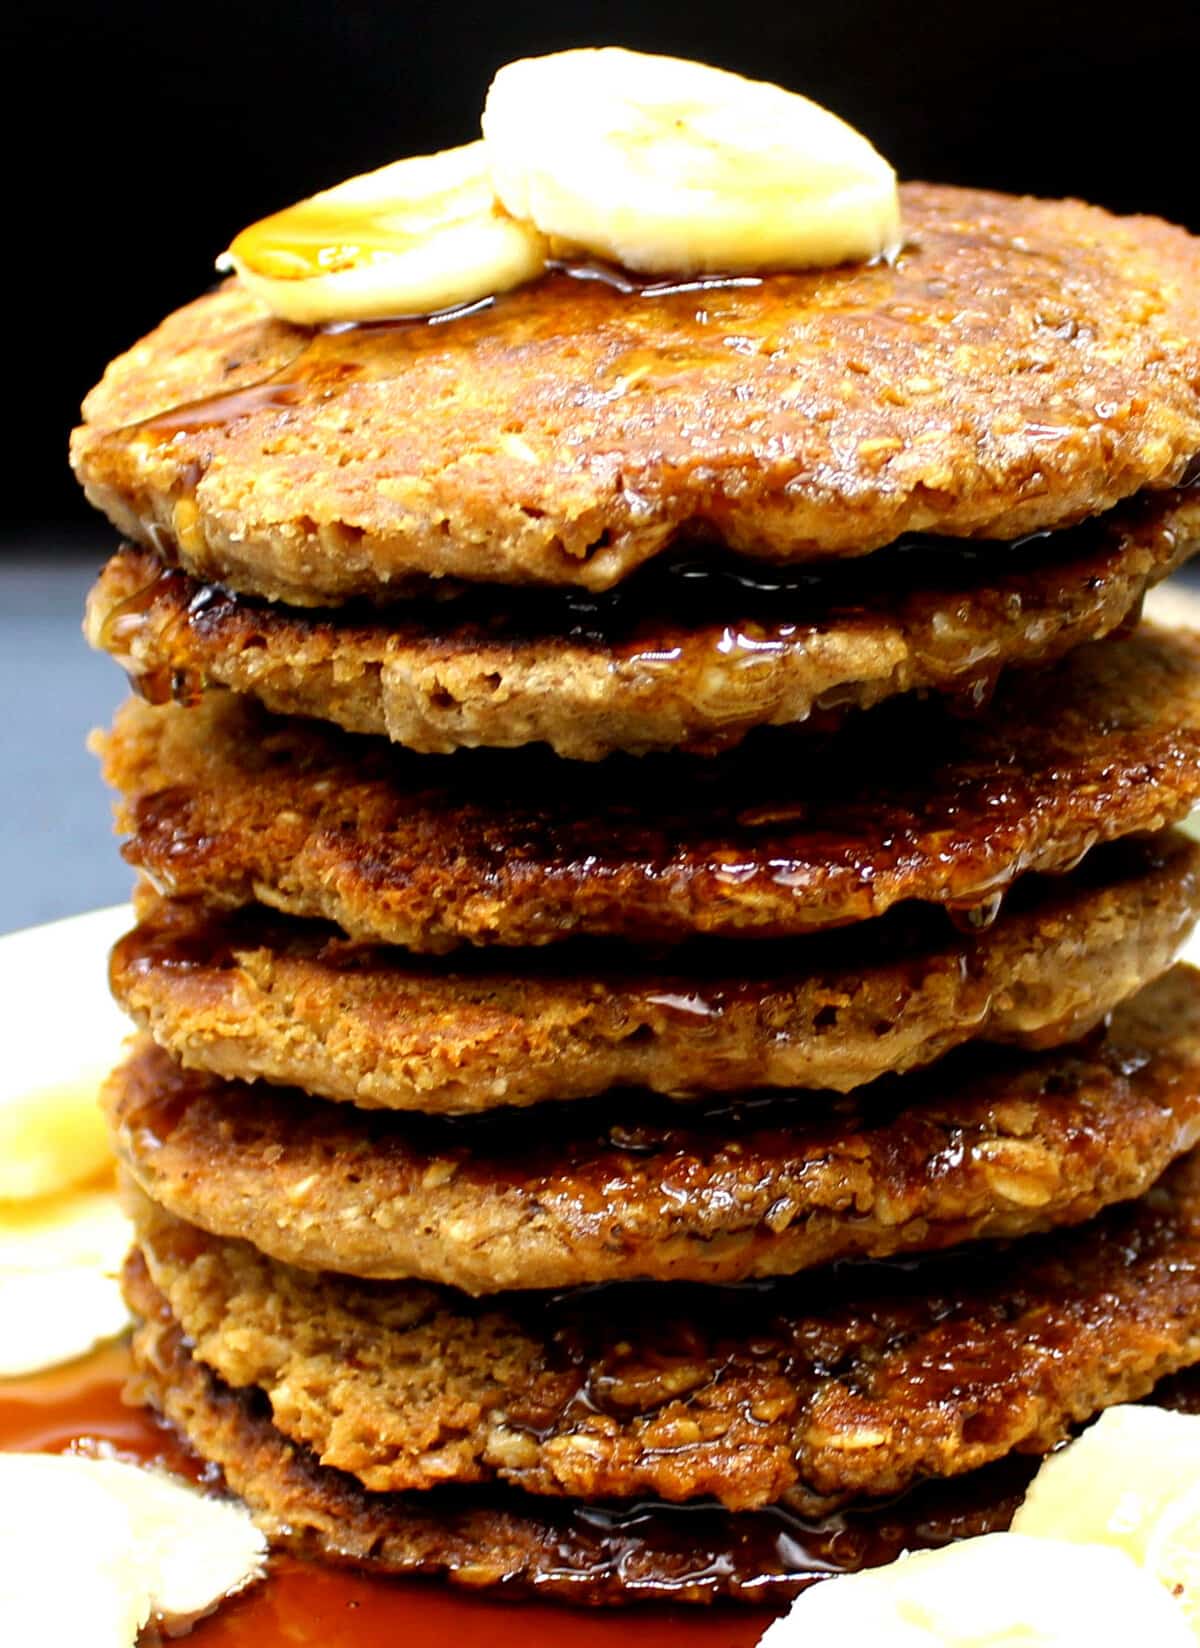 A stack of vegan oatmeal pancakes with slices of banana.